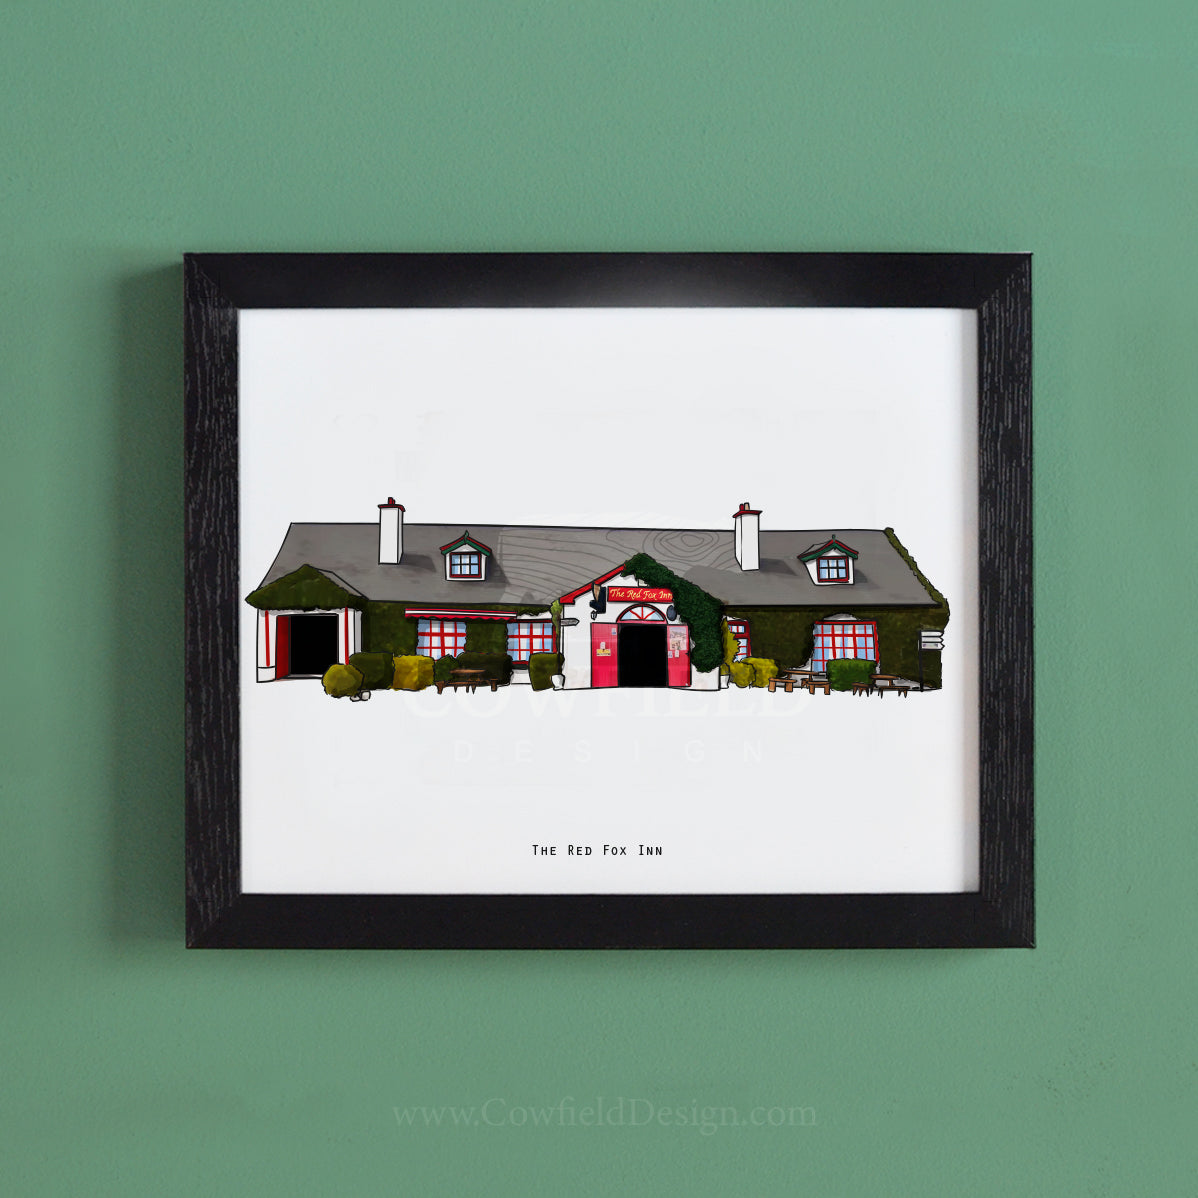 The Red Fox Inn Illustrated Pubs of Kerry